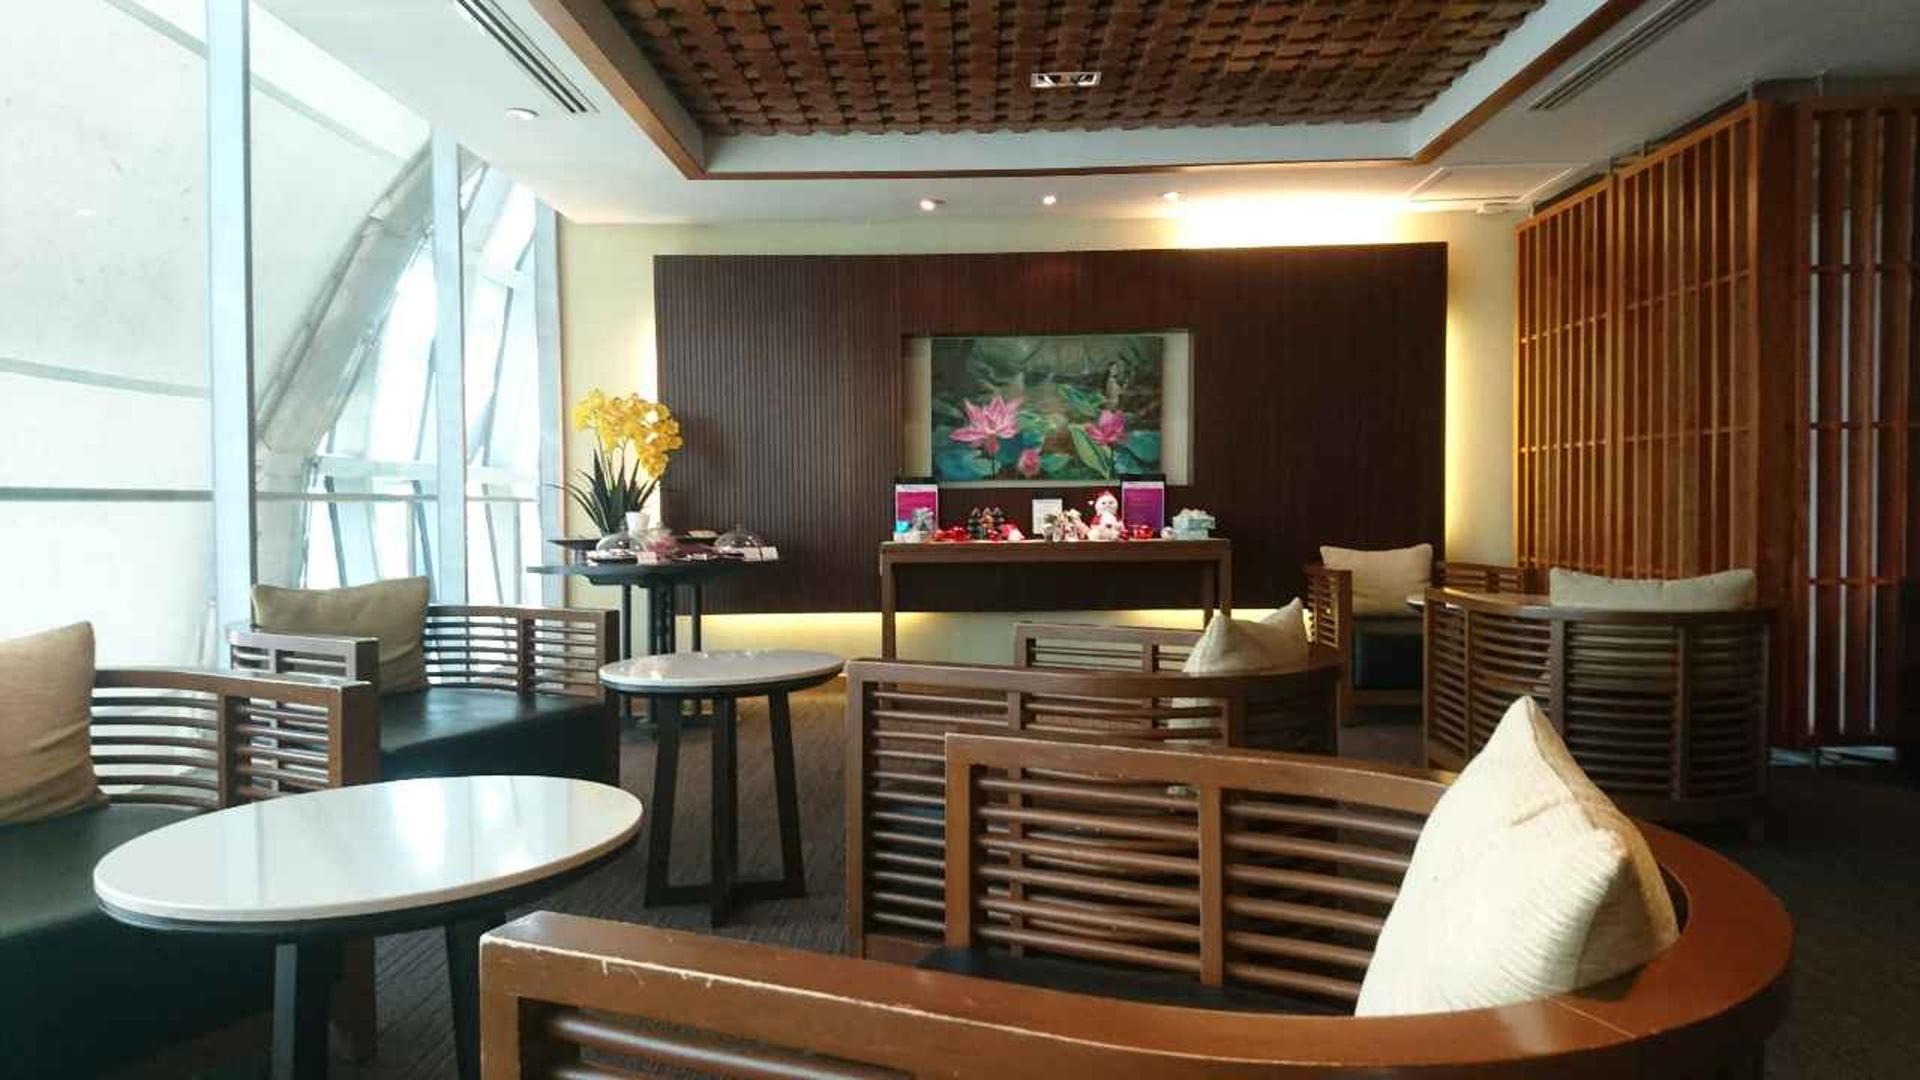 Thai Airways Royal Orchid Spa  image 18 of 25